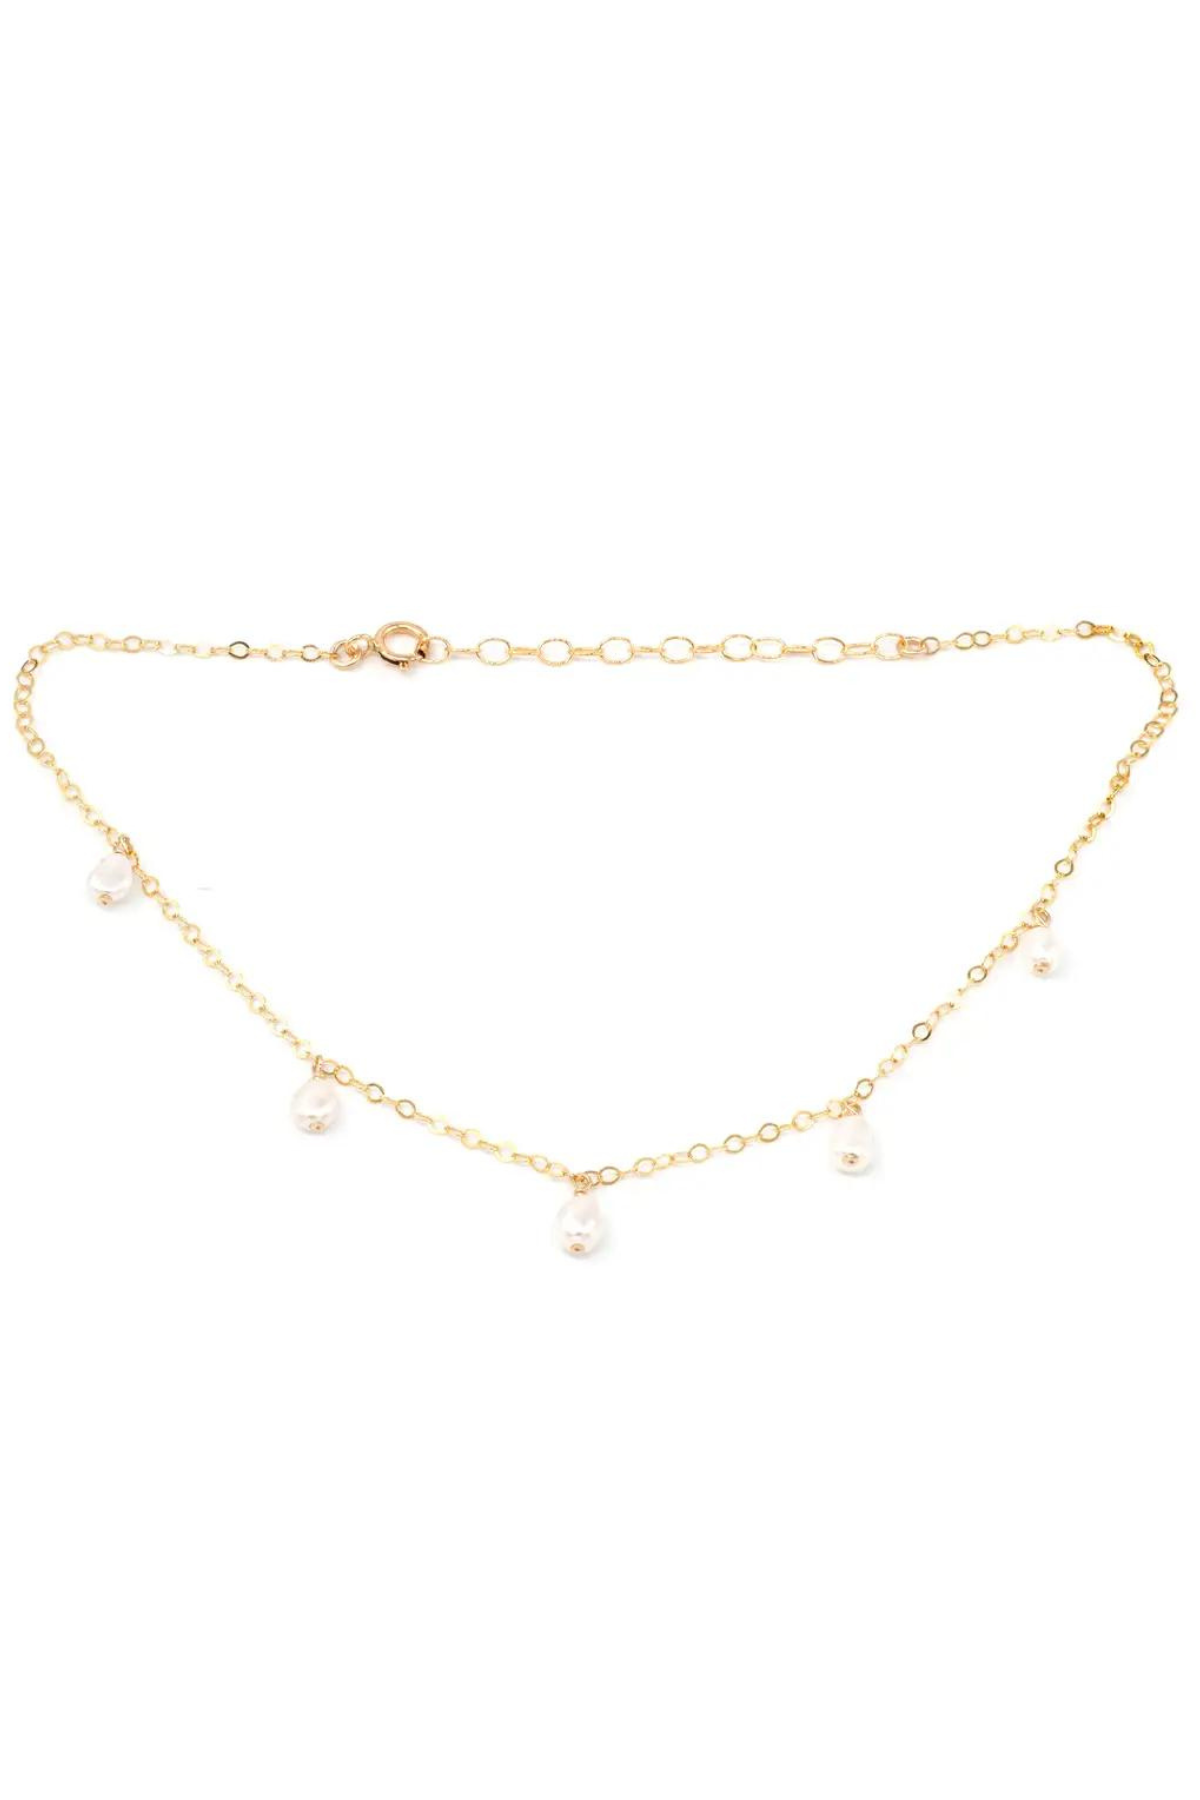 TIHITI GOLD FILLED PEARL ANKLET